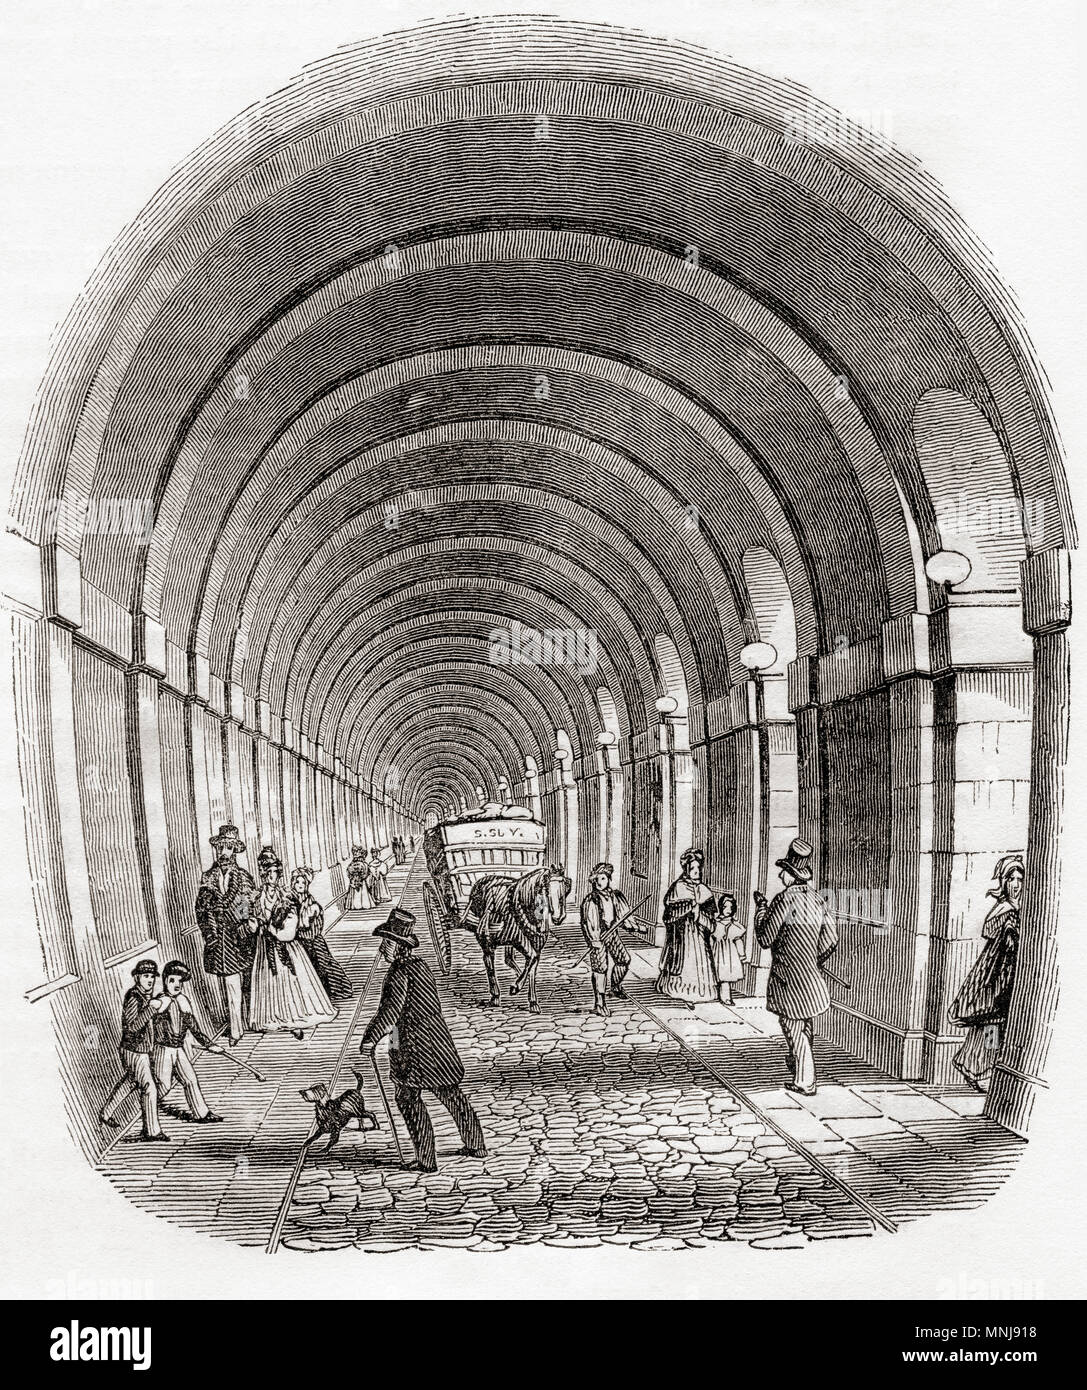 The Thames Tunnel, London, England, seen here in the early 19th century. Built beneath the River Thames in London, it connects Rotherhithe and Wapping and was the  first tunnel known to have been constructed successfully underneath a navigable river.   From Old England: A Pictorial Museum, published 1847. Stock Photo